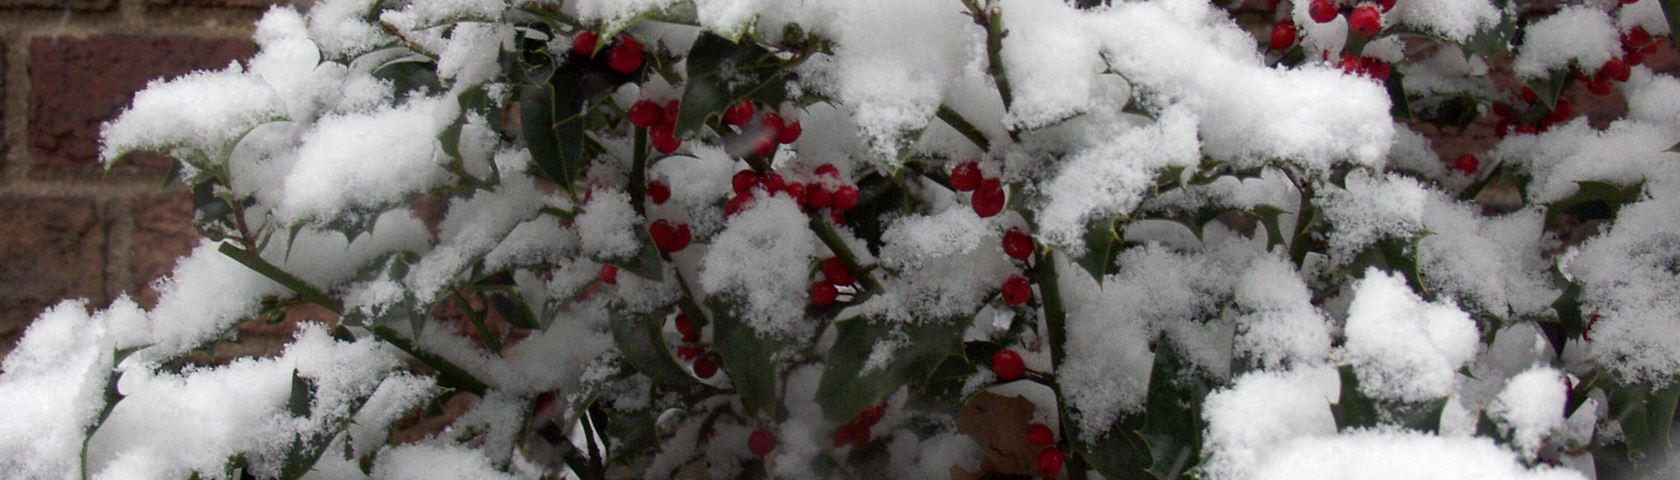 Snow Covered Holly Bushes